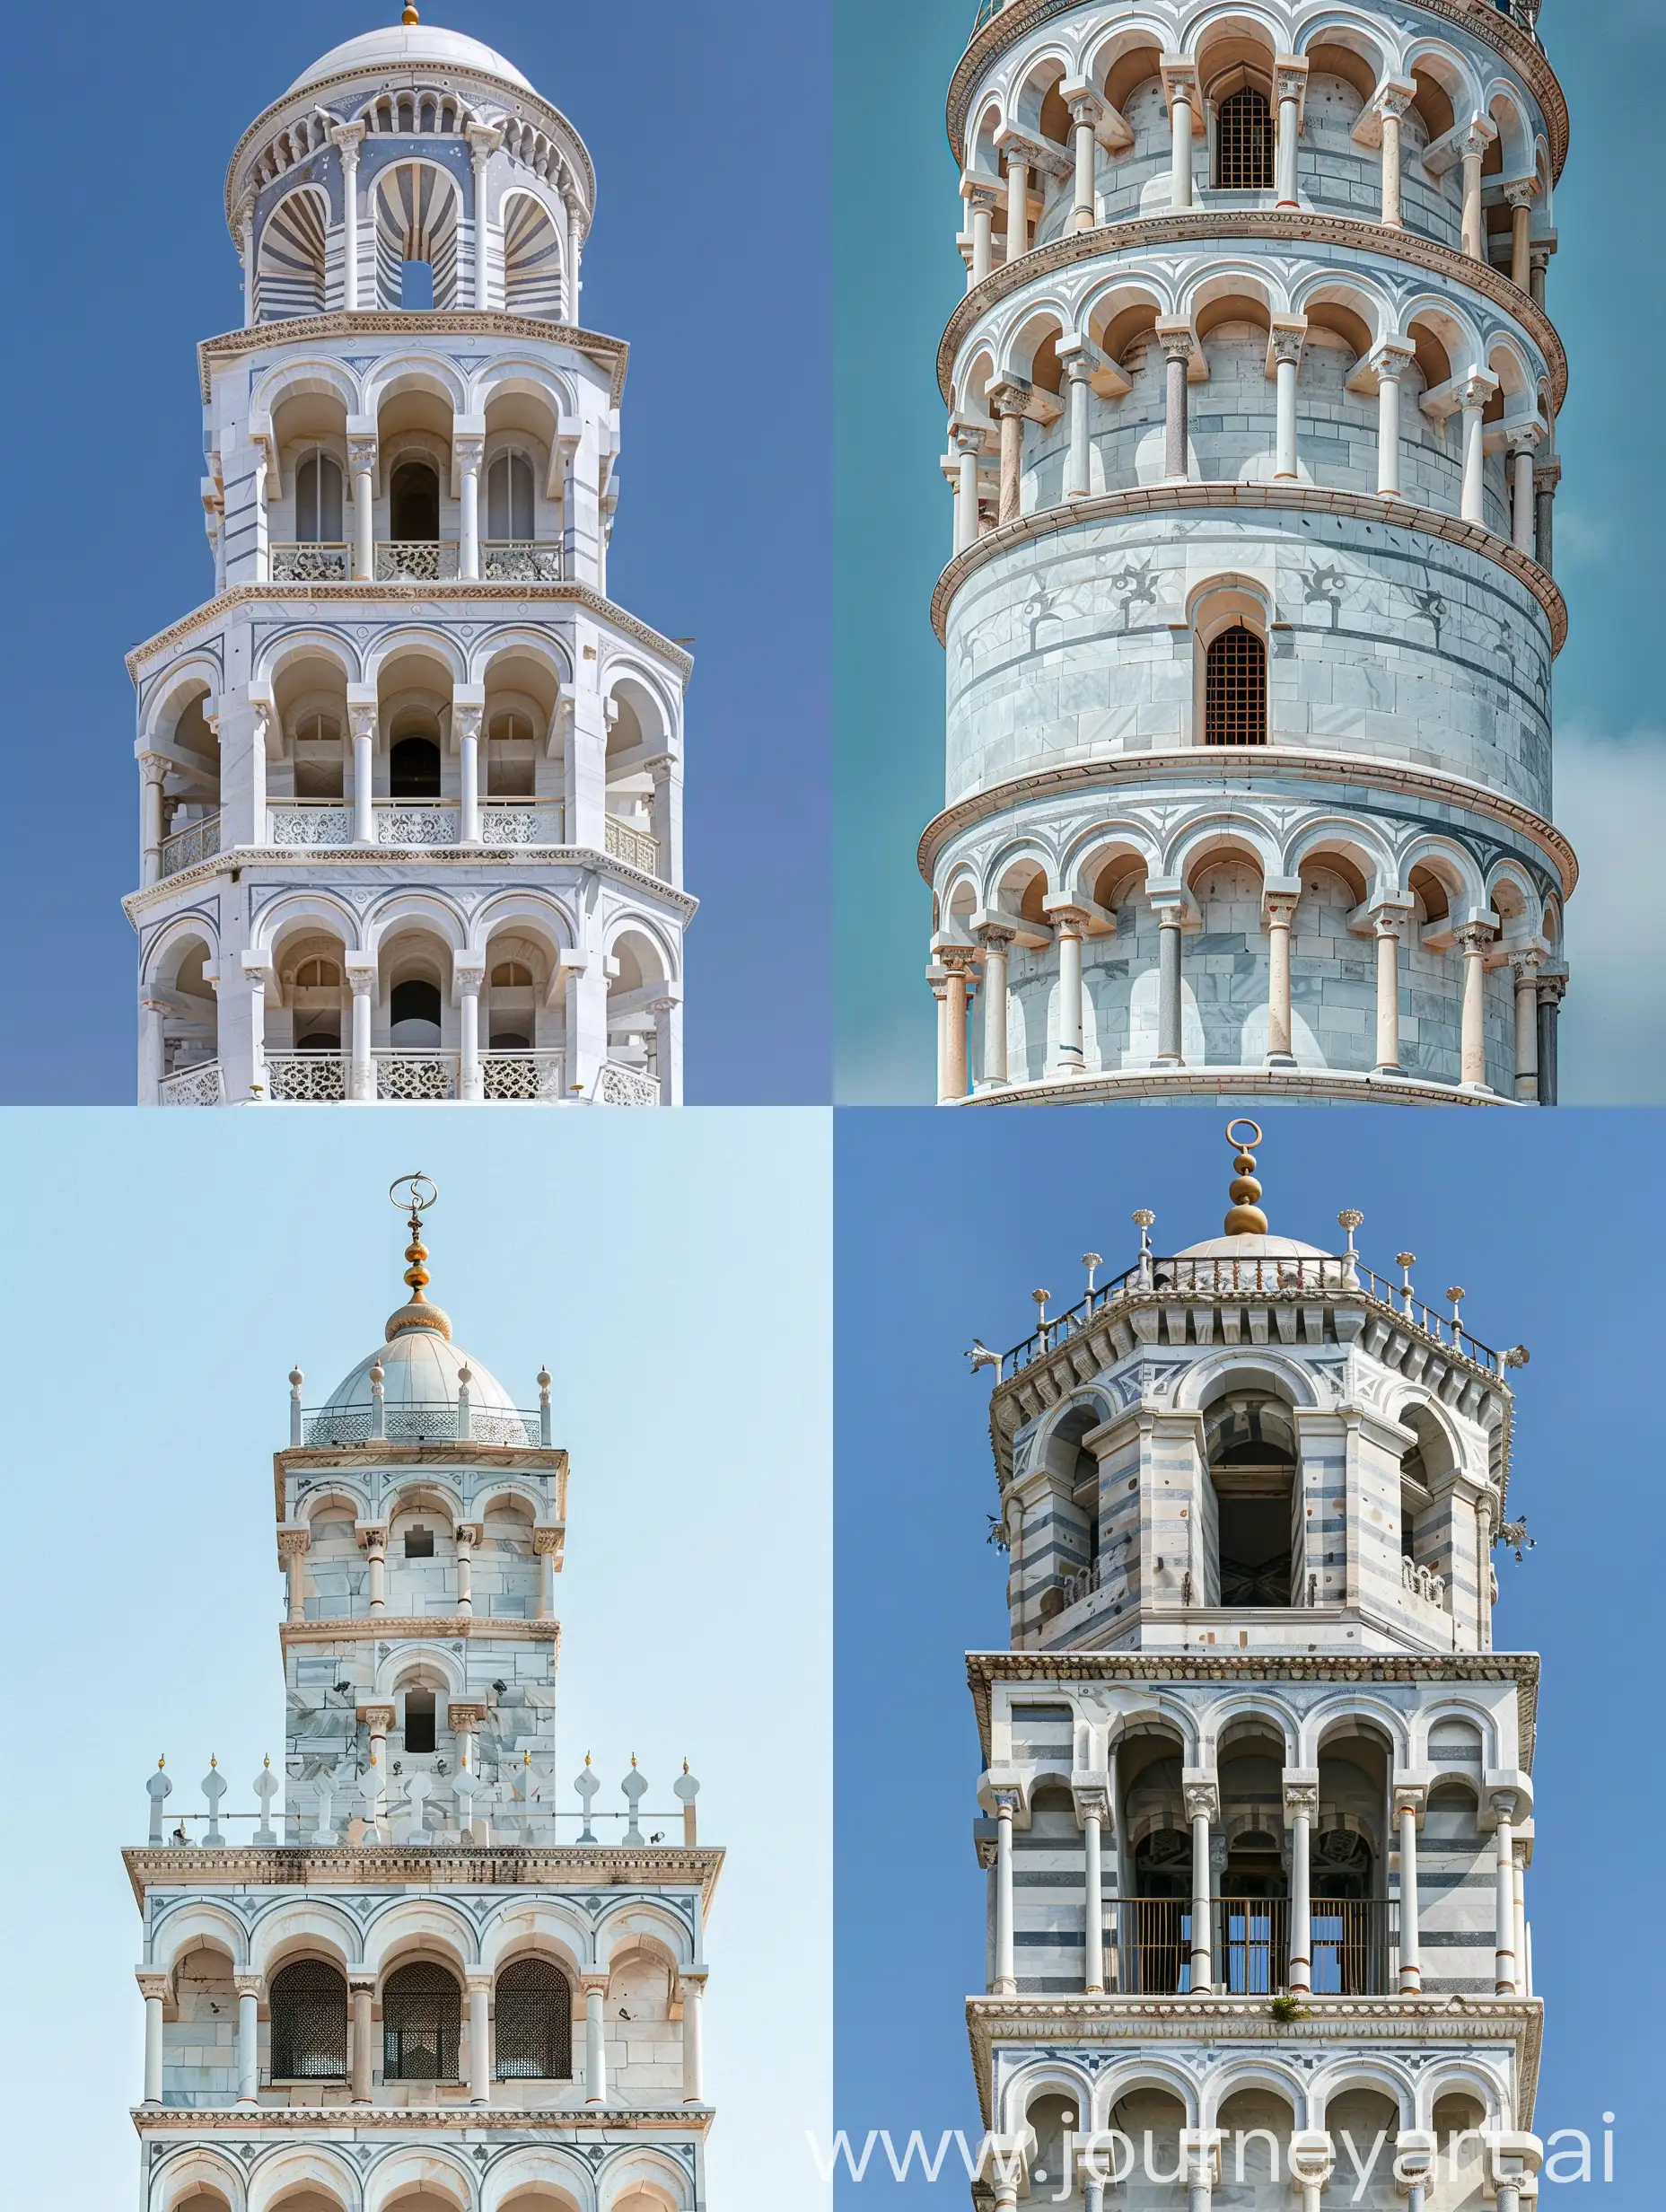 Mughal minaret influenced Leaning tower of Pisa, Mughal arches with mughal arched windows, Gurudwara dome at the top, White marbled, full top to bottom view